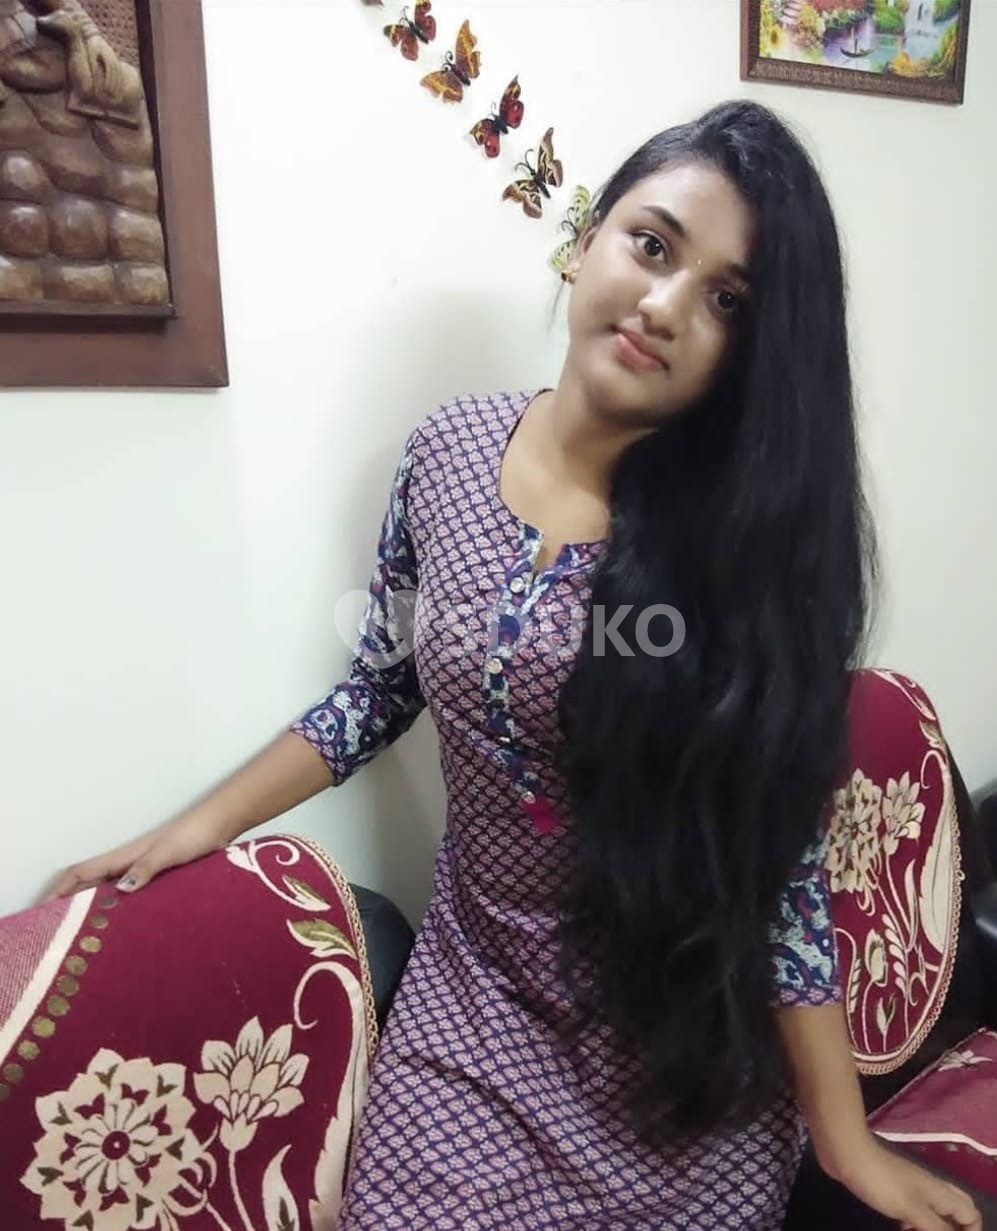 KORAMANGALA 💯 % FULLY SATISFACTION AND DOORSTEP. INCALL OUTCALL SERVICE AVAILABLE SAFE AND SECURE..